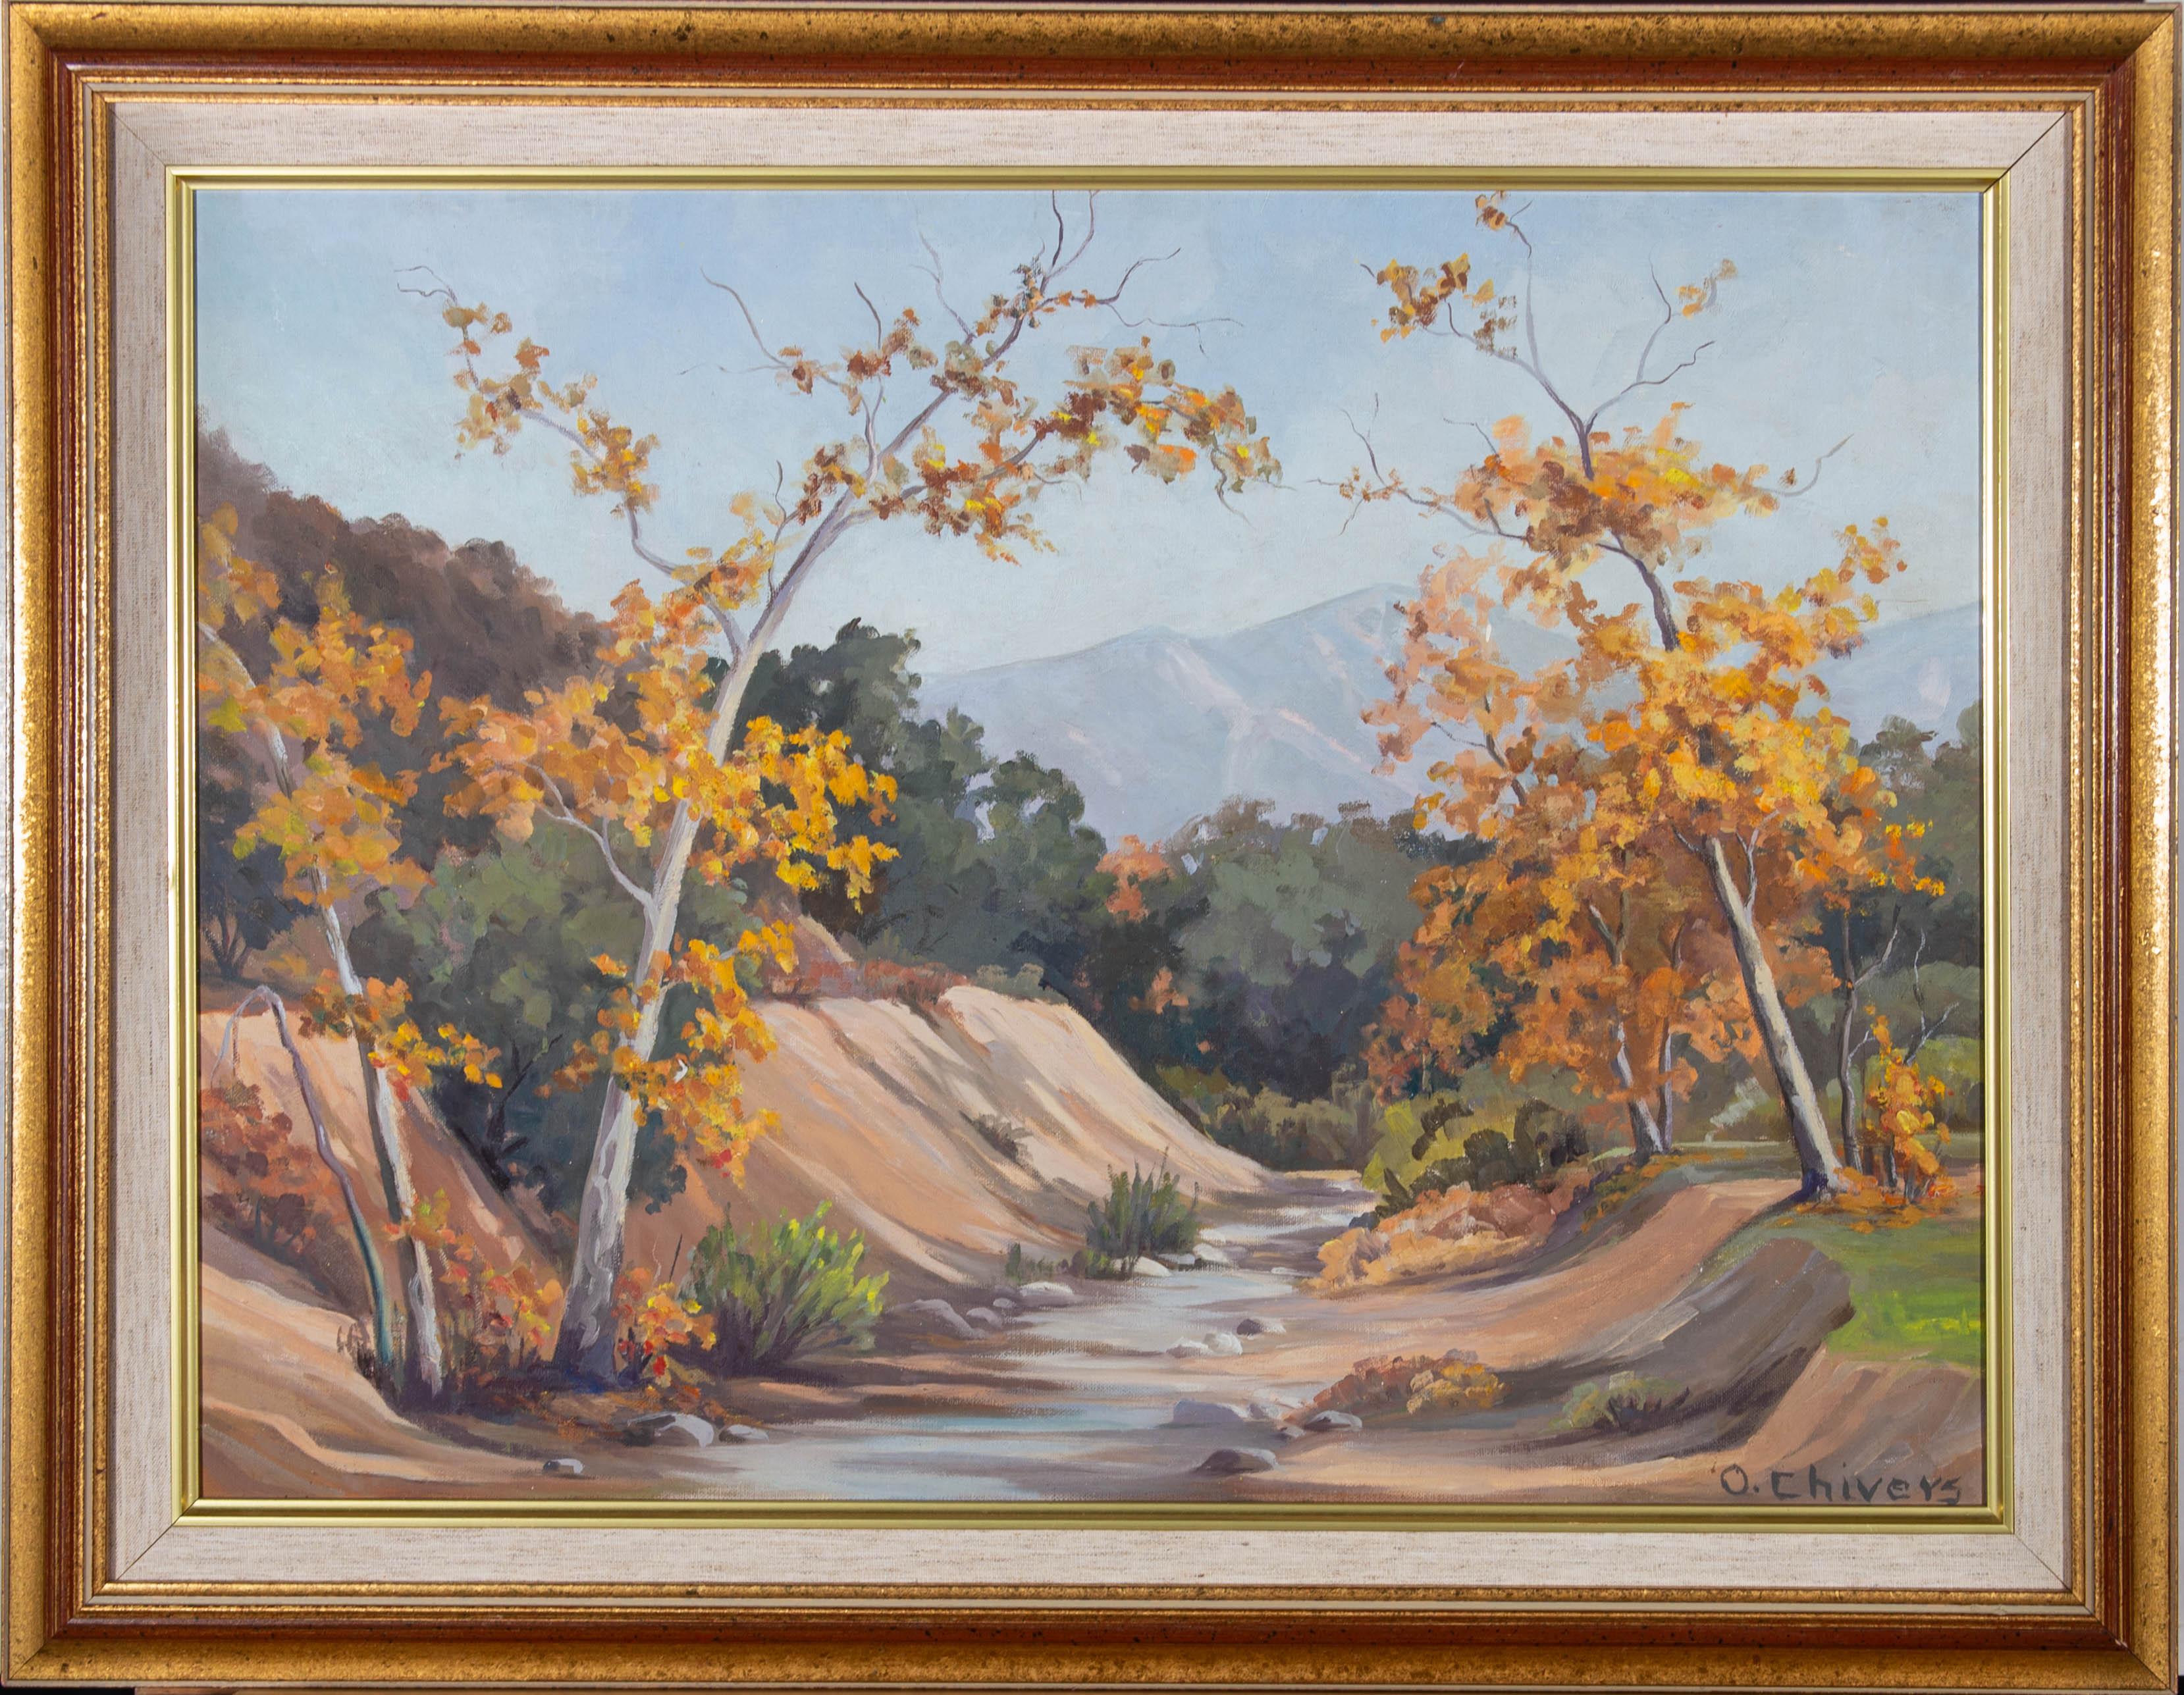 An attractive oil painting by O. Chivers, depicting an autumnal landscape scene with mountains in the distance. Signed to the lower right-hand corner. Presented in a fabric slip and in a distressed, gilt-effect frame, as shown. On canvas